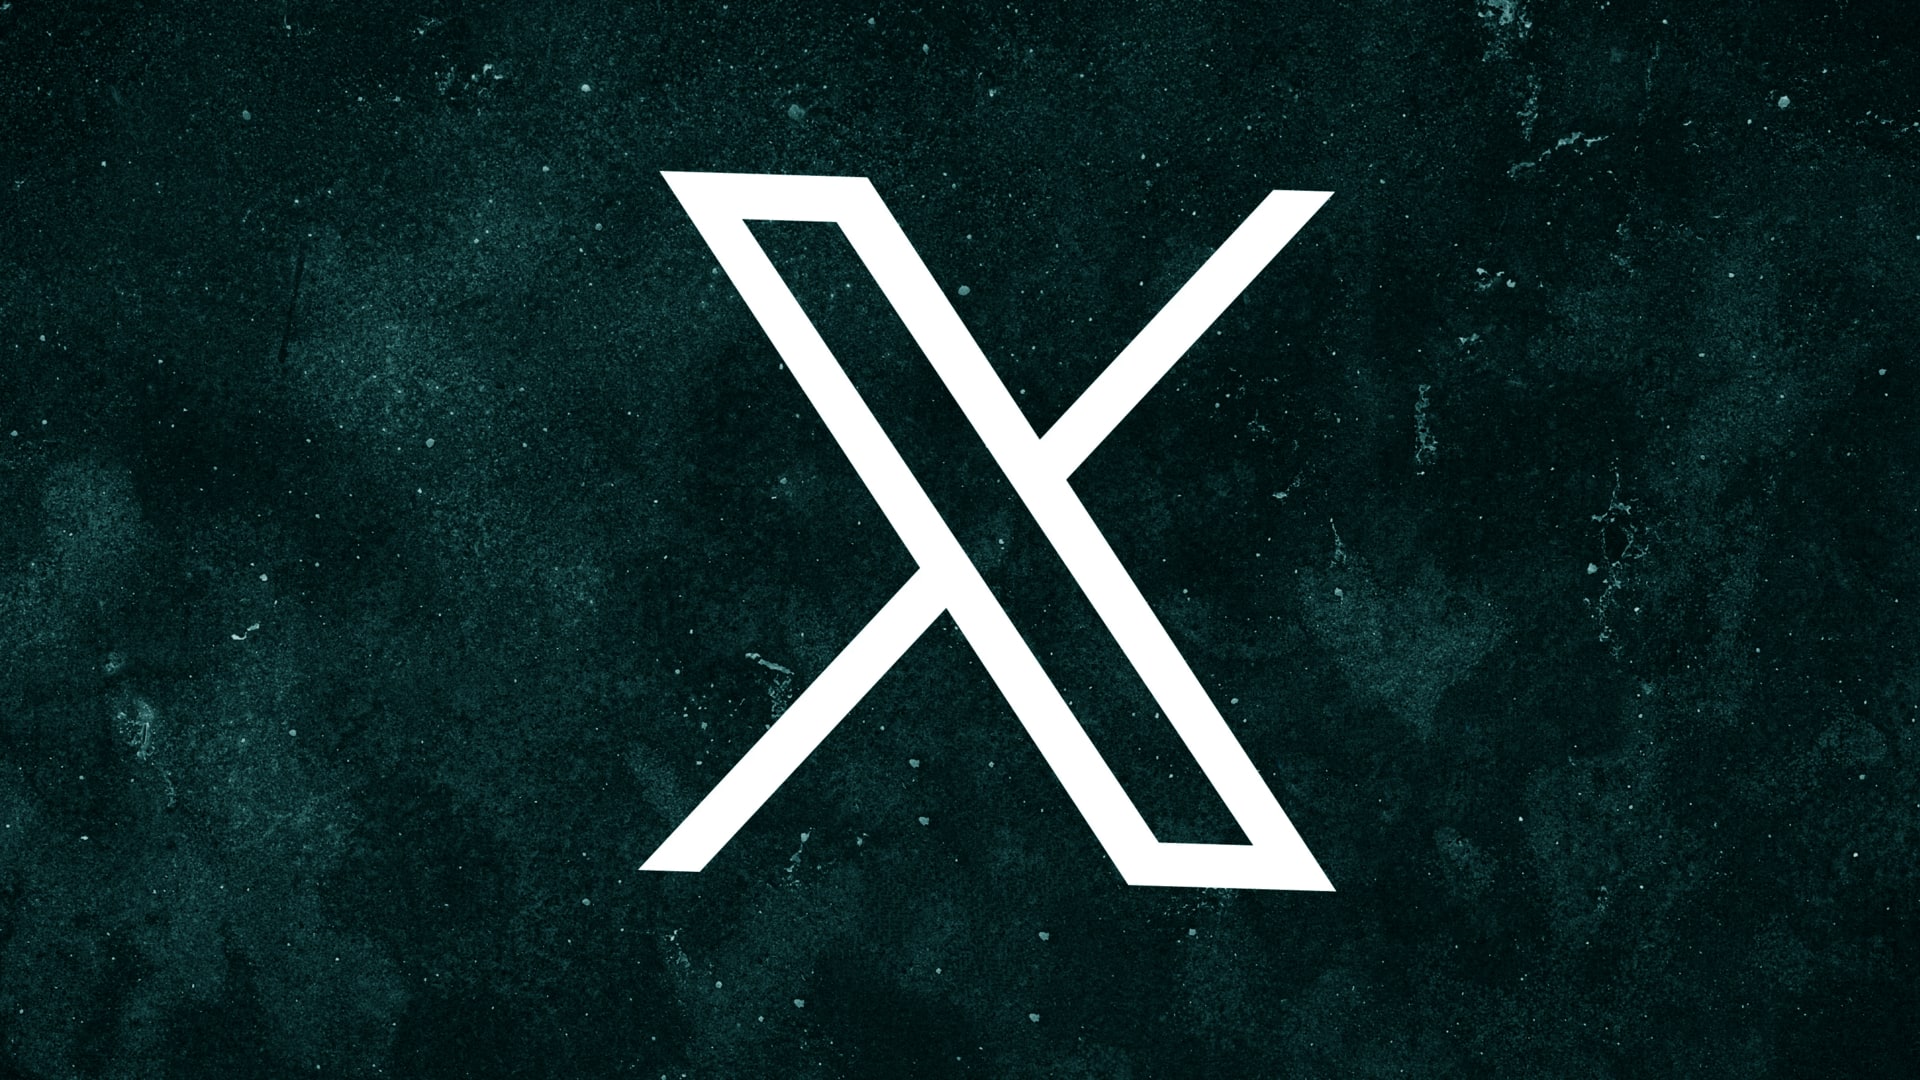 X planning to establish content moderation office in Austin: Report